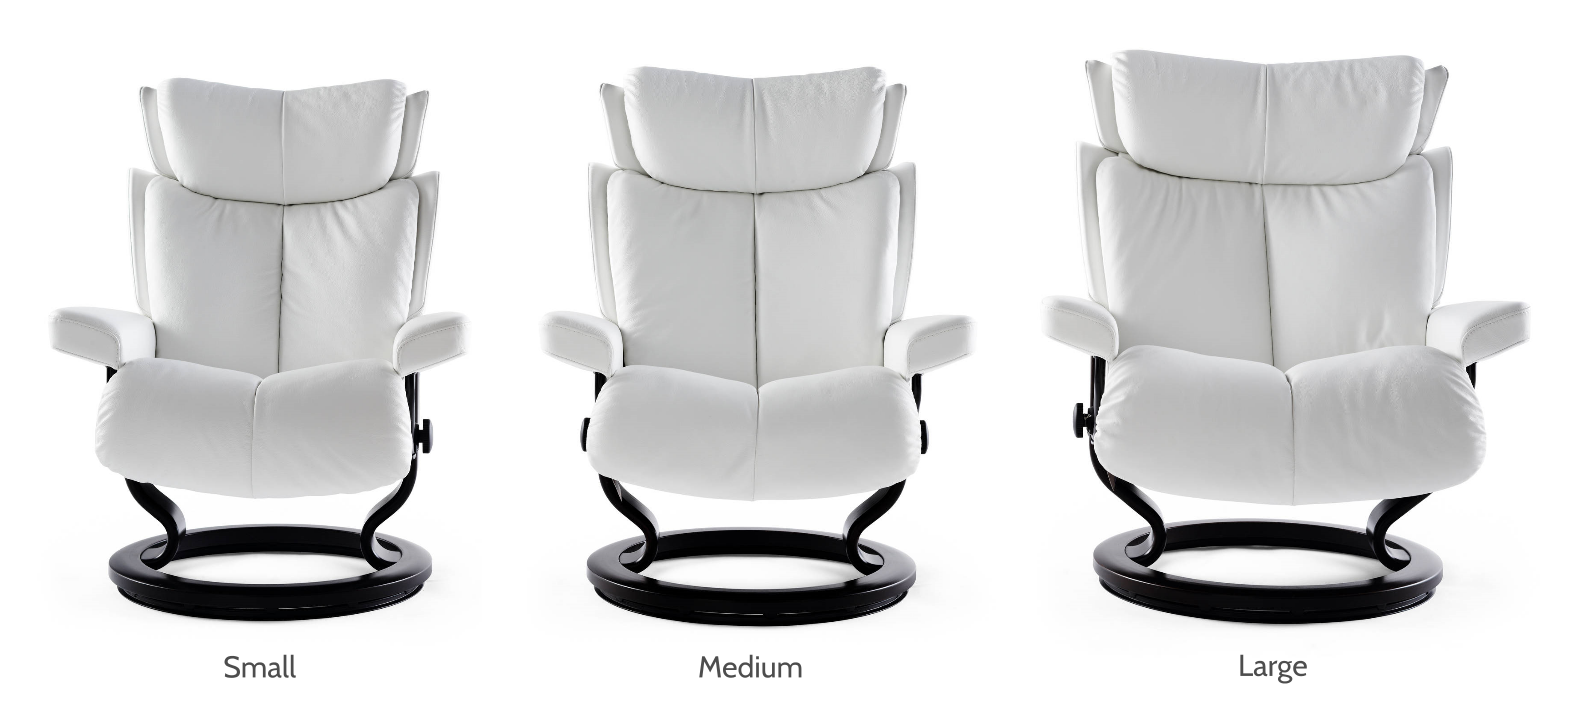 Stressless Recliner Size Options: Small Medium Large